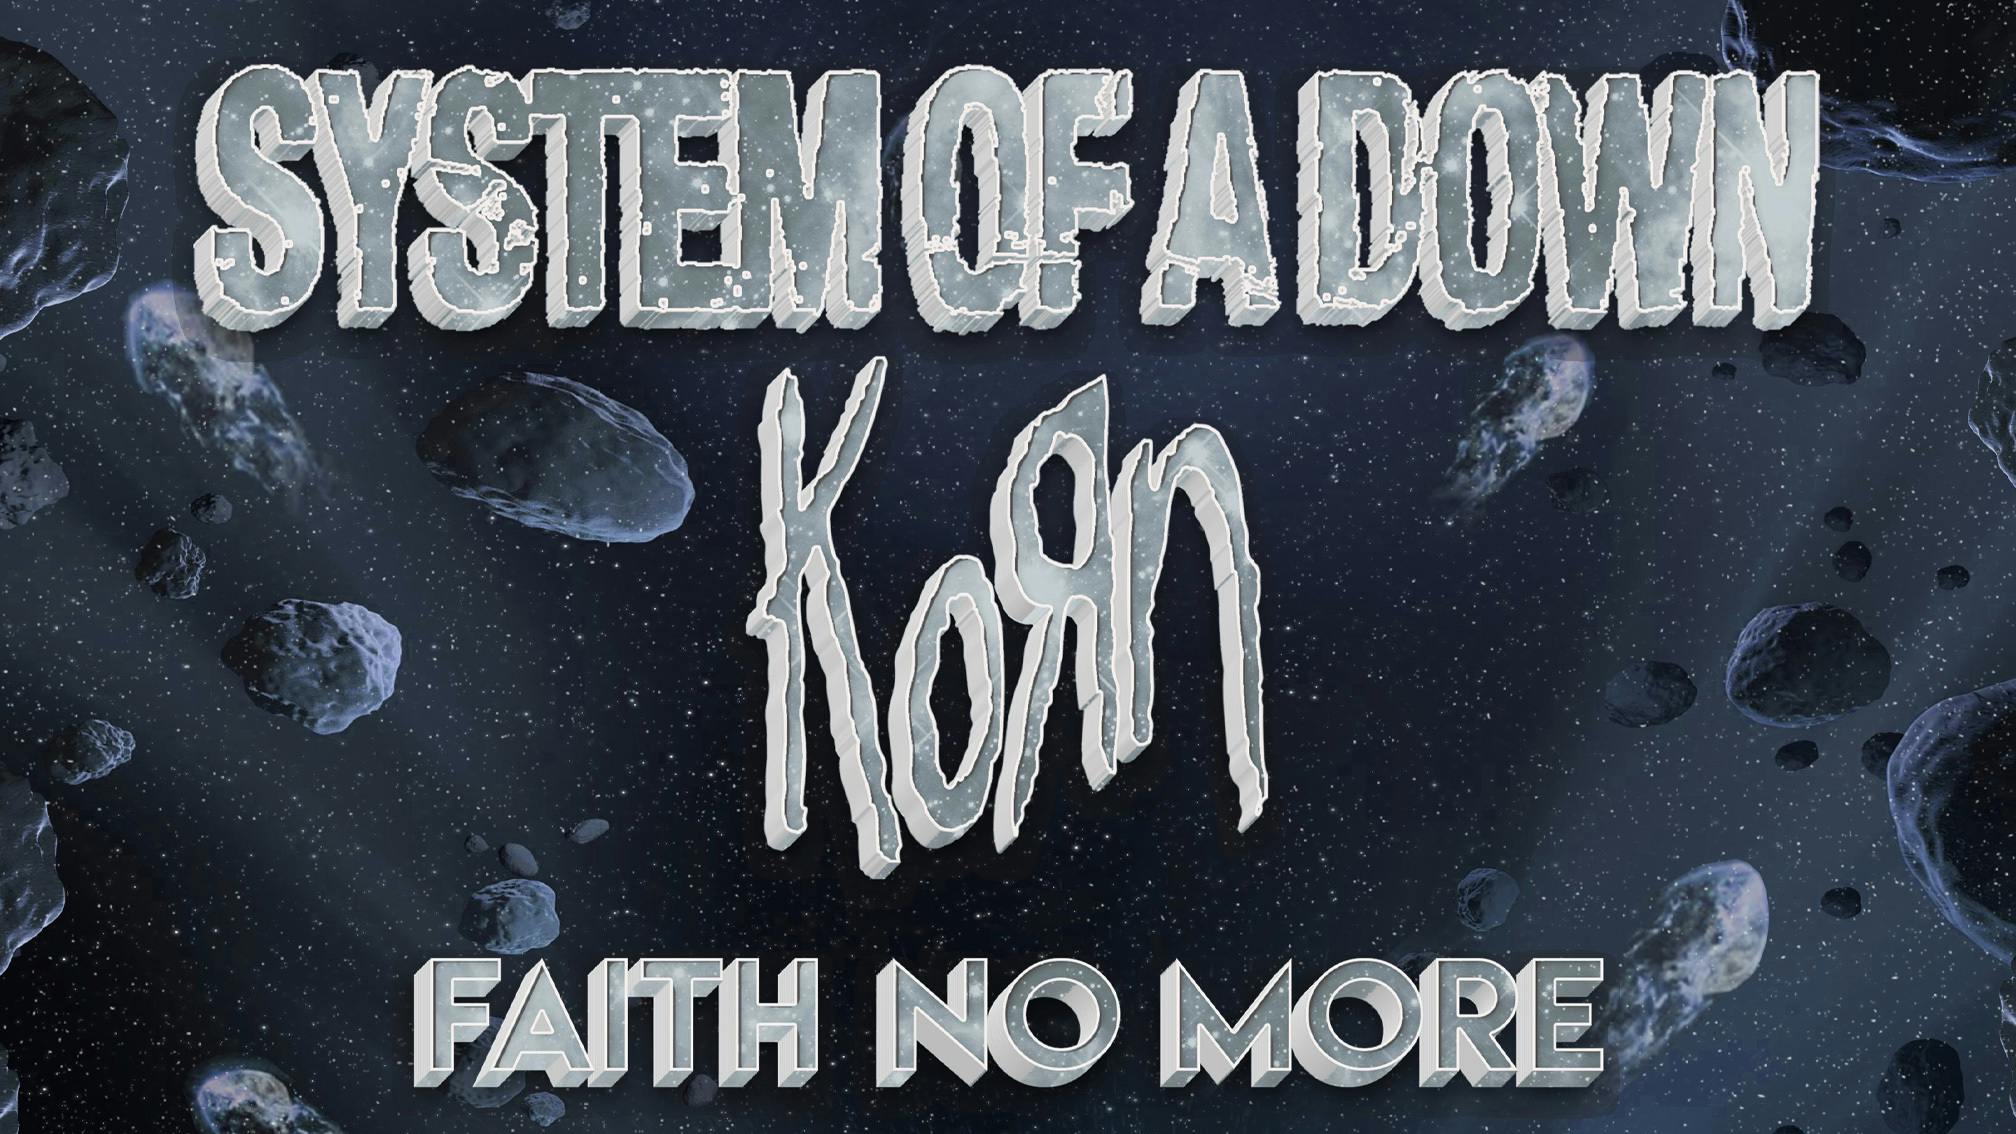 System Of A Down, Korn And Faith No More Announce New 2021 Stadium Shows